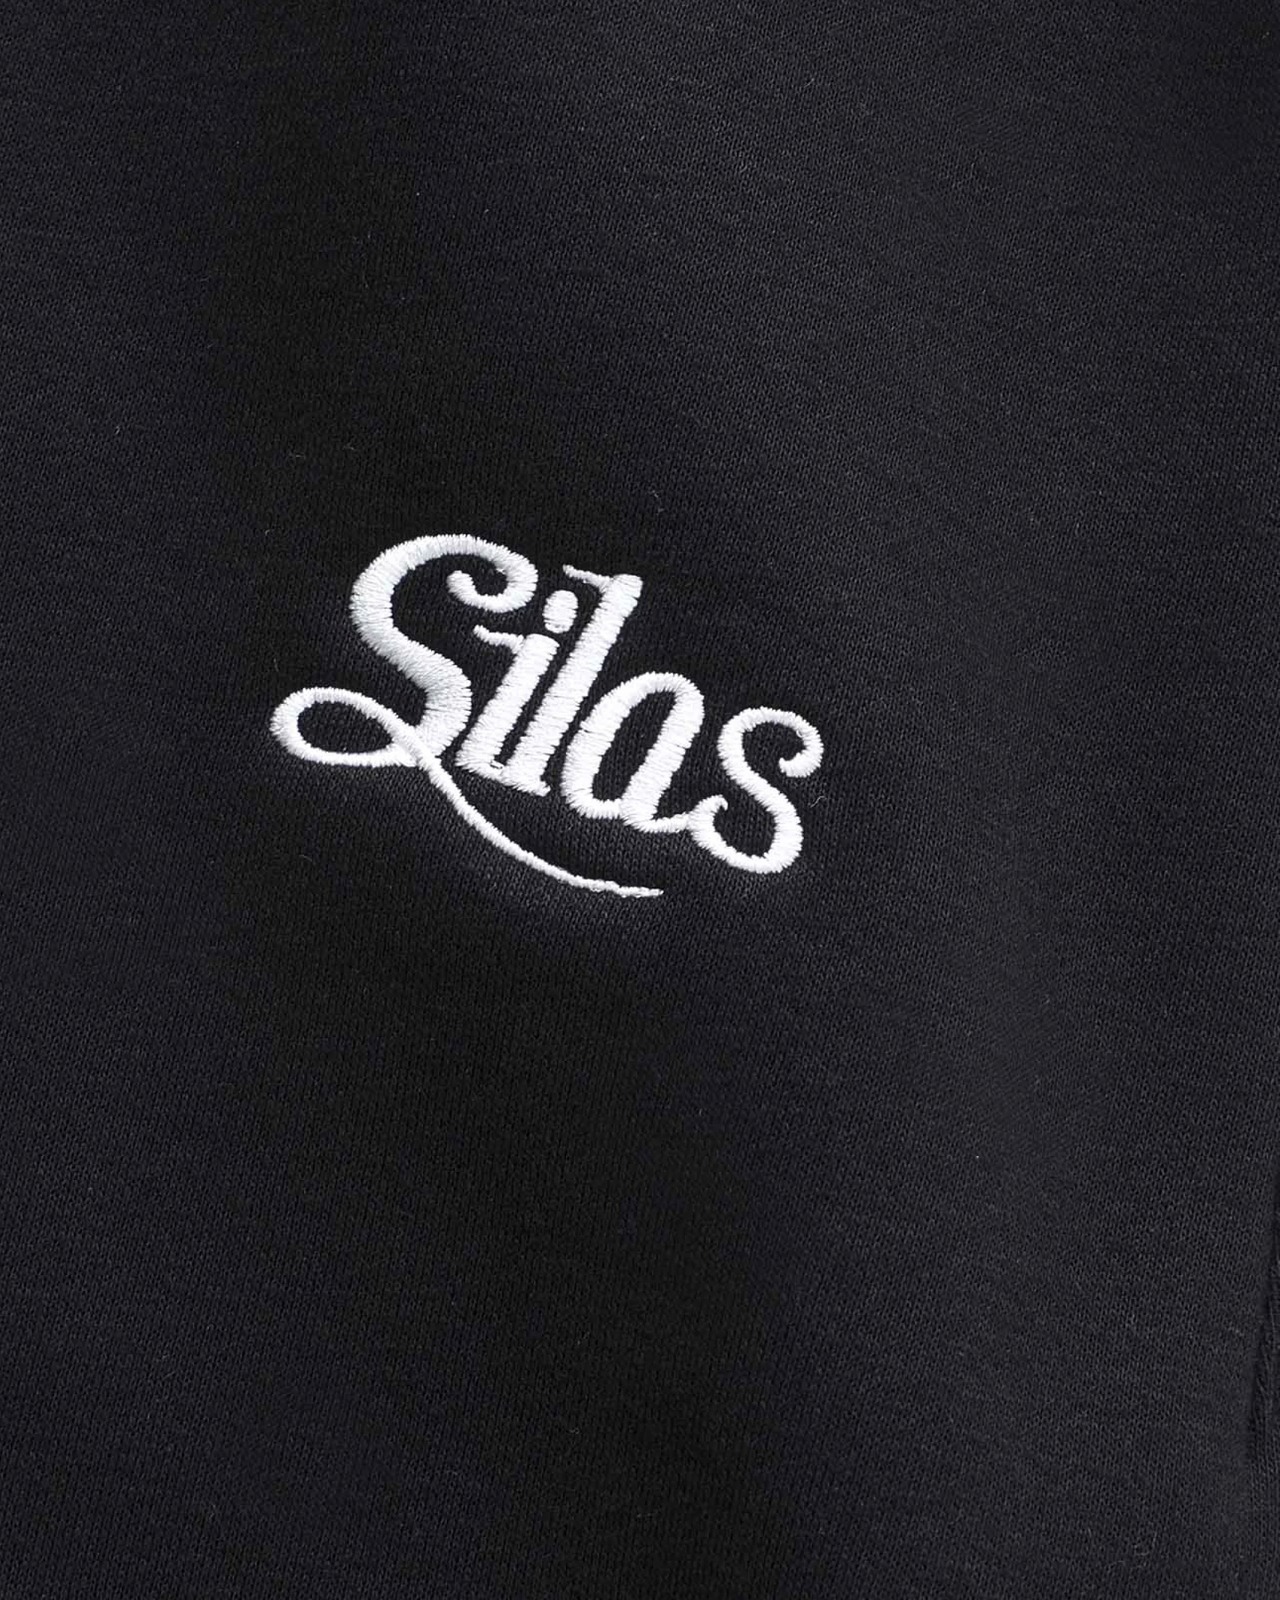 【SILAS】SILAS SWT CHEF PANTS【サイラス】